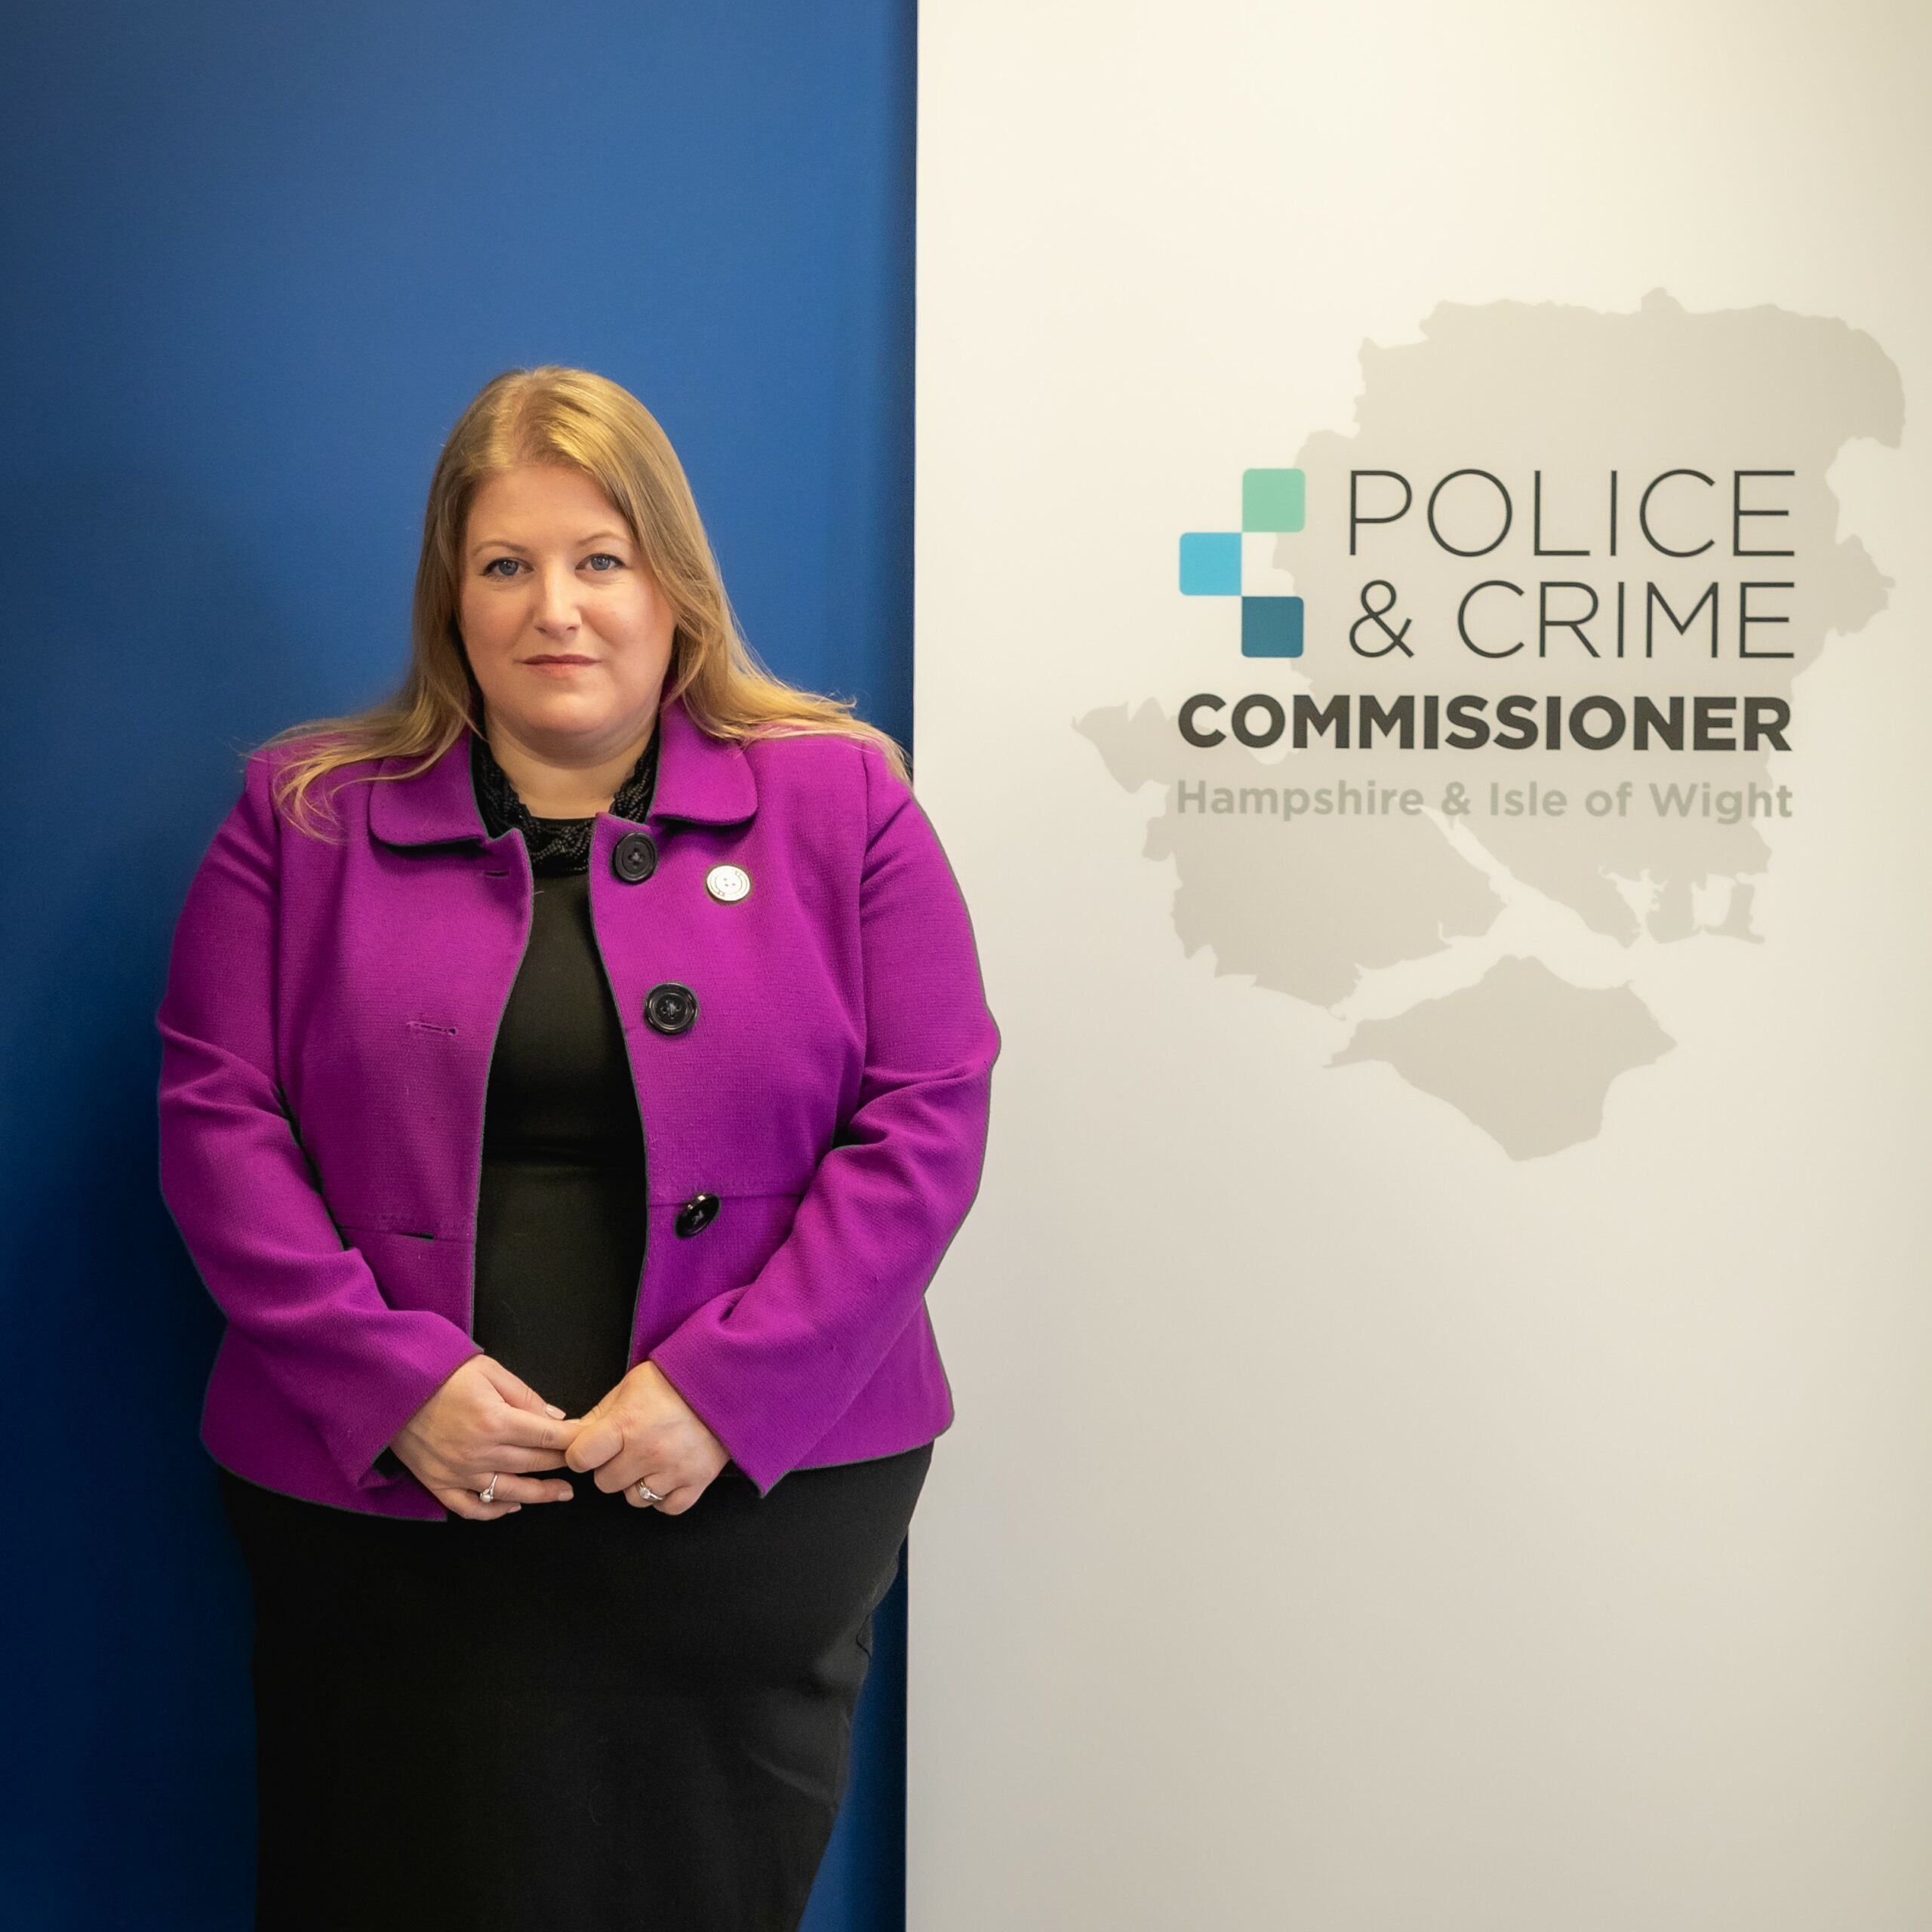 Views on council tax contributions to policing sought